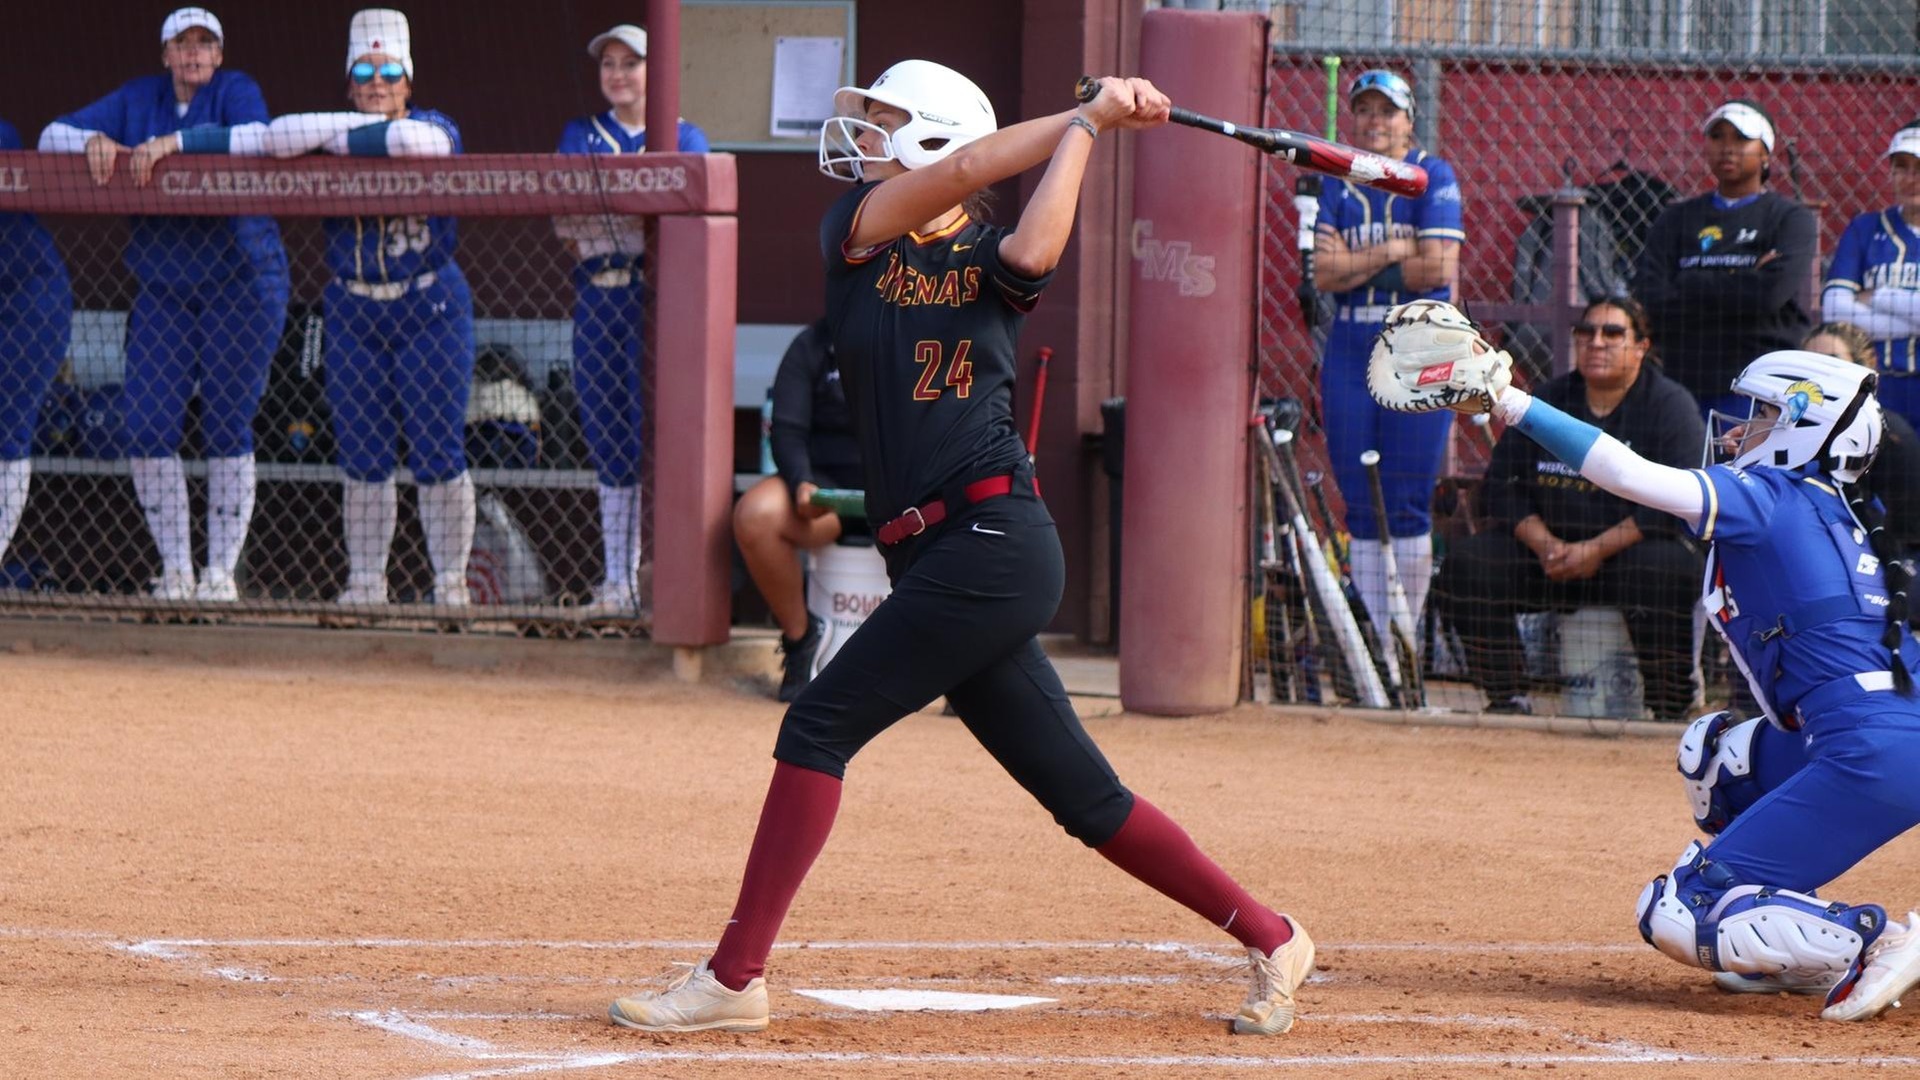 Rachel Sapirstein was 2-for-3 in both games of the doubleheader